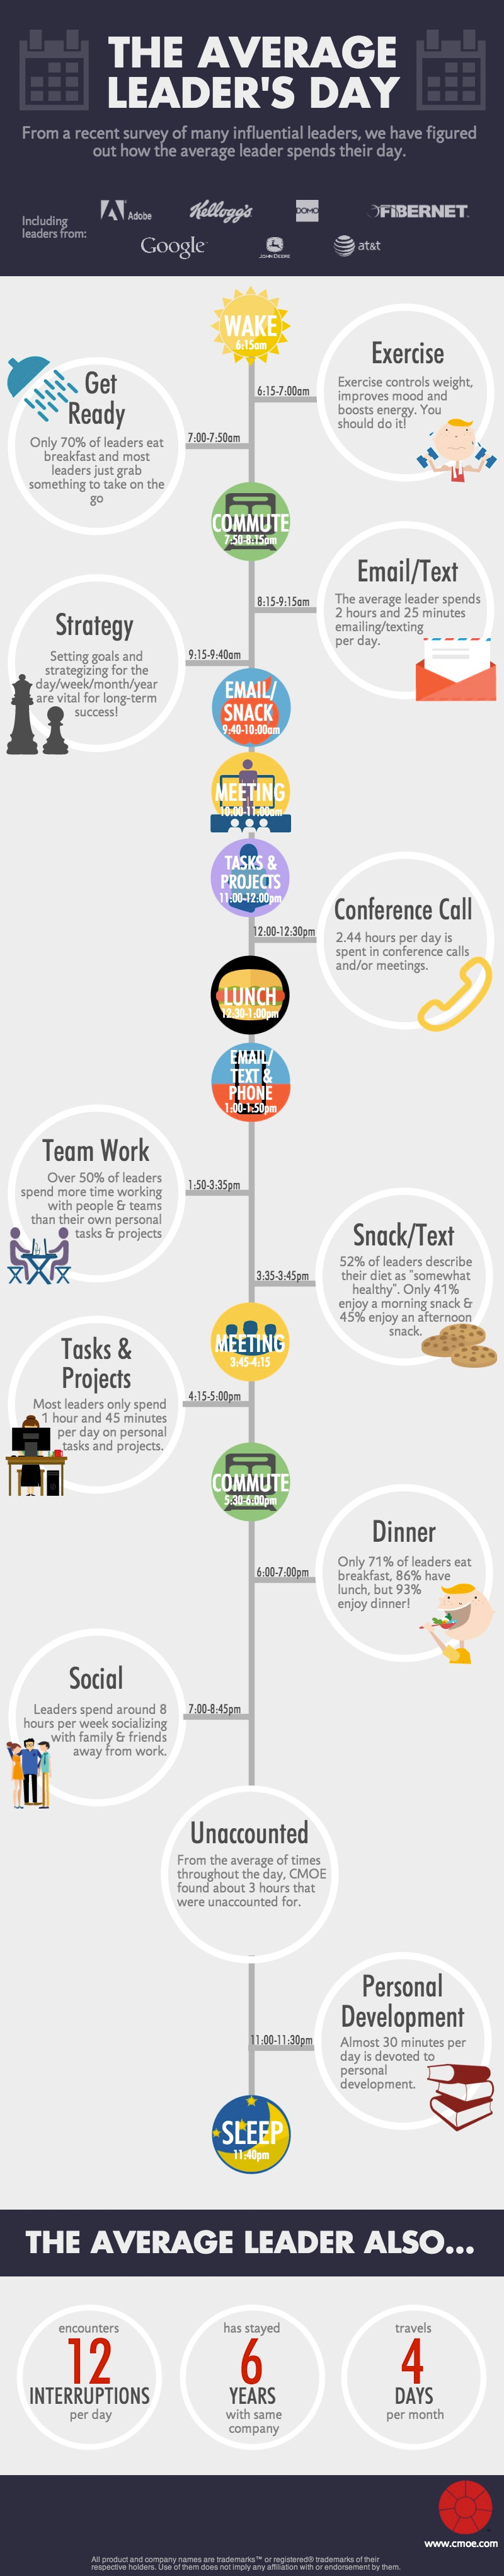 how-fortune-500-leaders spend-minute-day-infographic